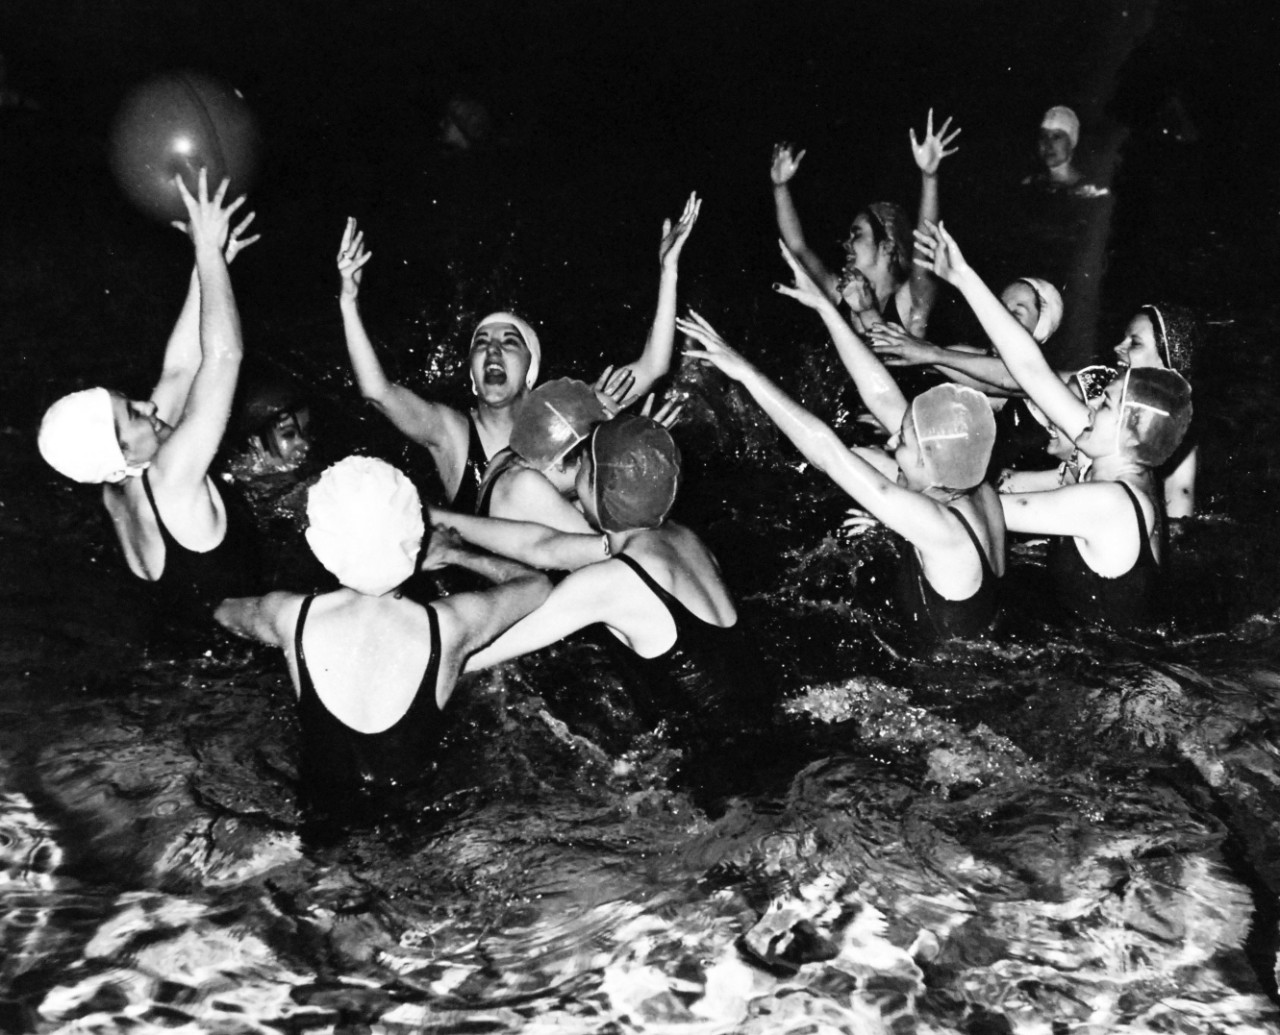 80-G-471606:   U.S. Naval Training Center, Women’s Reserve, Cedar Falls, Iowa, February 1943.   WAVES playing water polo at Boot Camp, Cedar Falls, Iowa.   Photographed by PH2 Howard Liberman.  Steichen Photograph Unit, TR-3010.  Official U.S. Navy photograph, now in the collections of the National Archives.   